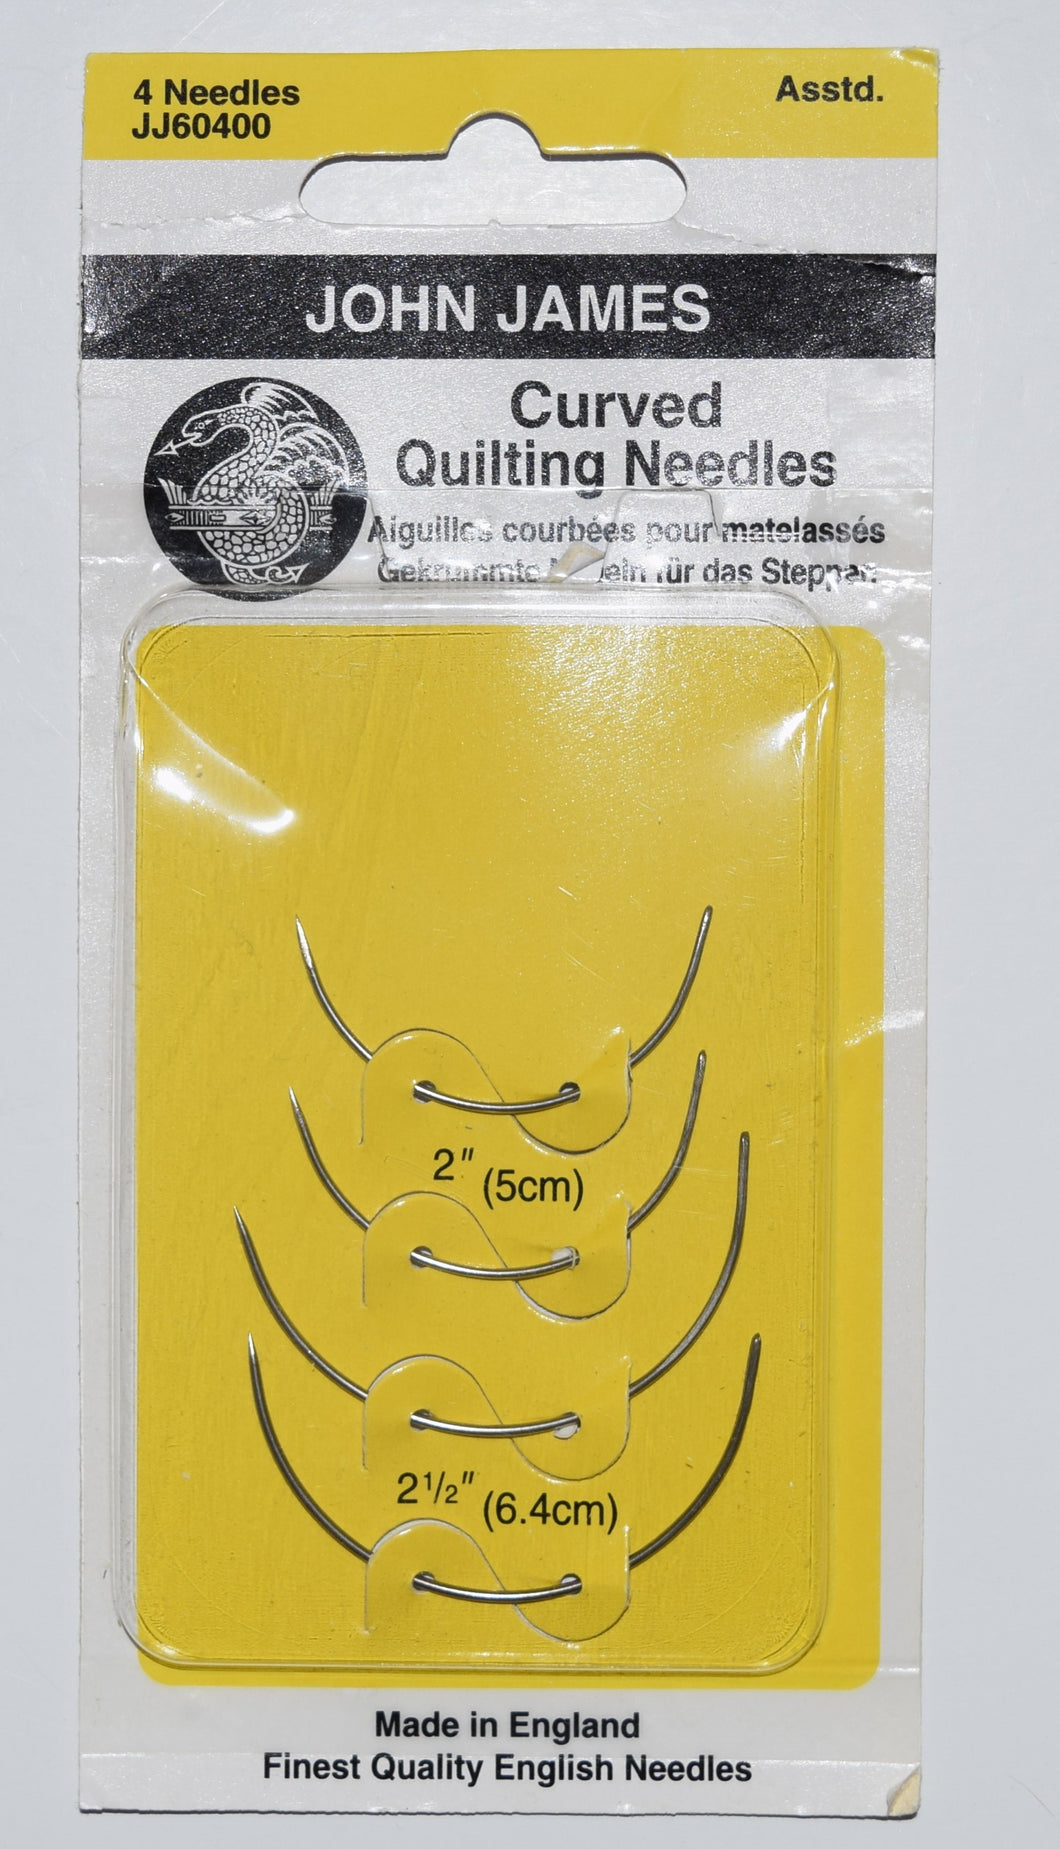 John James Curved Quilting Needles